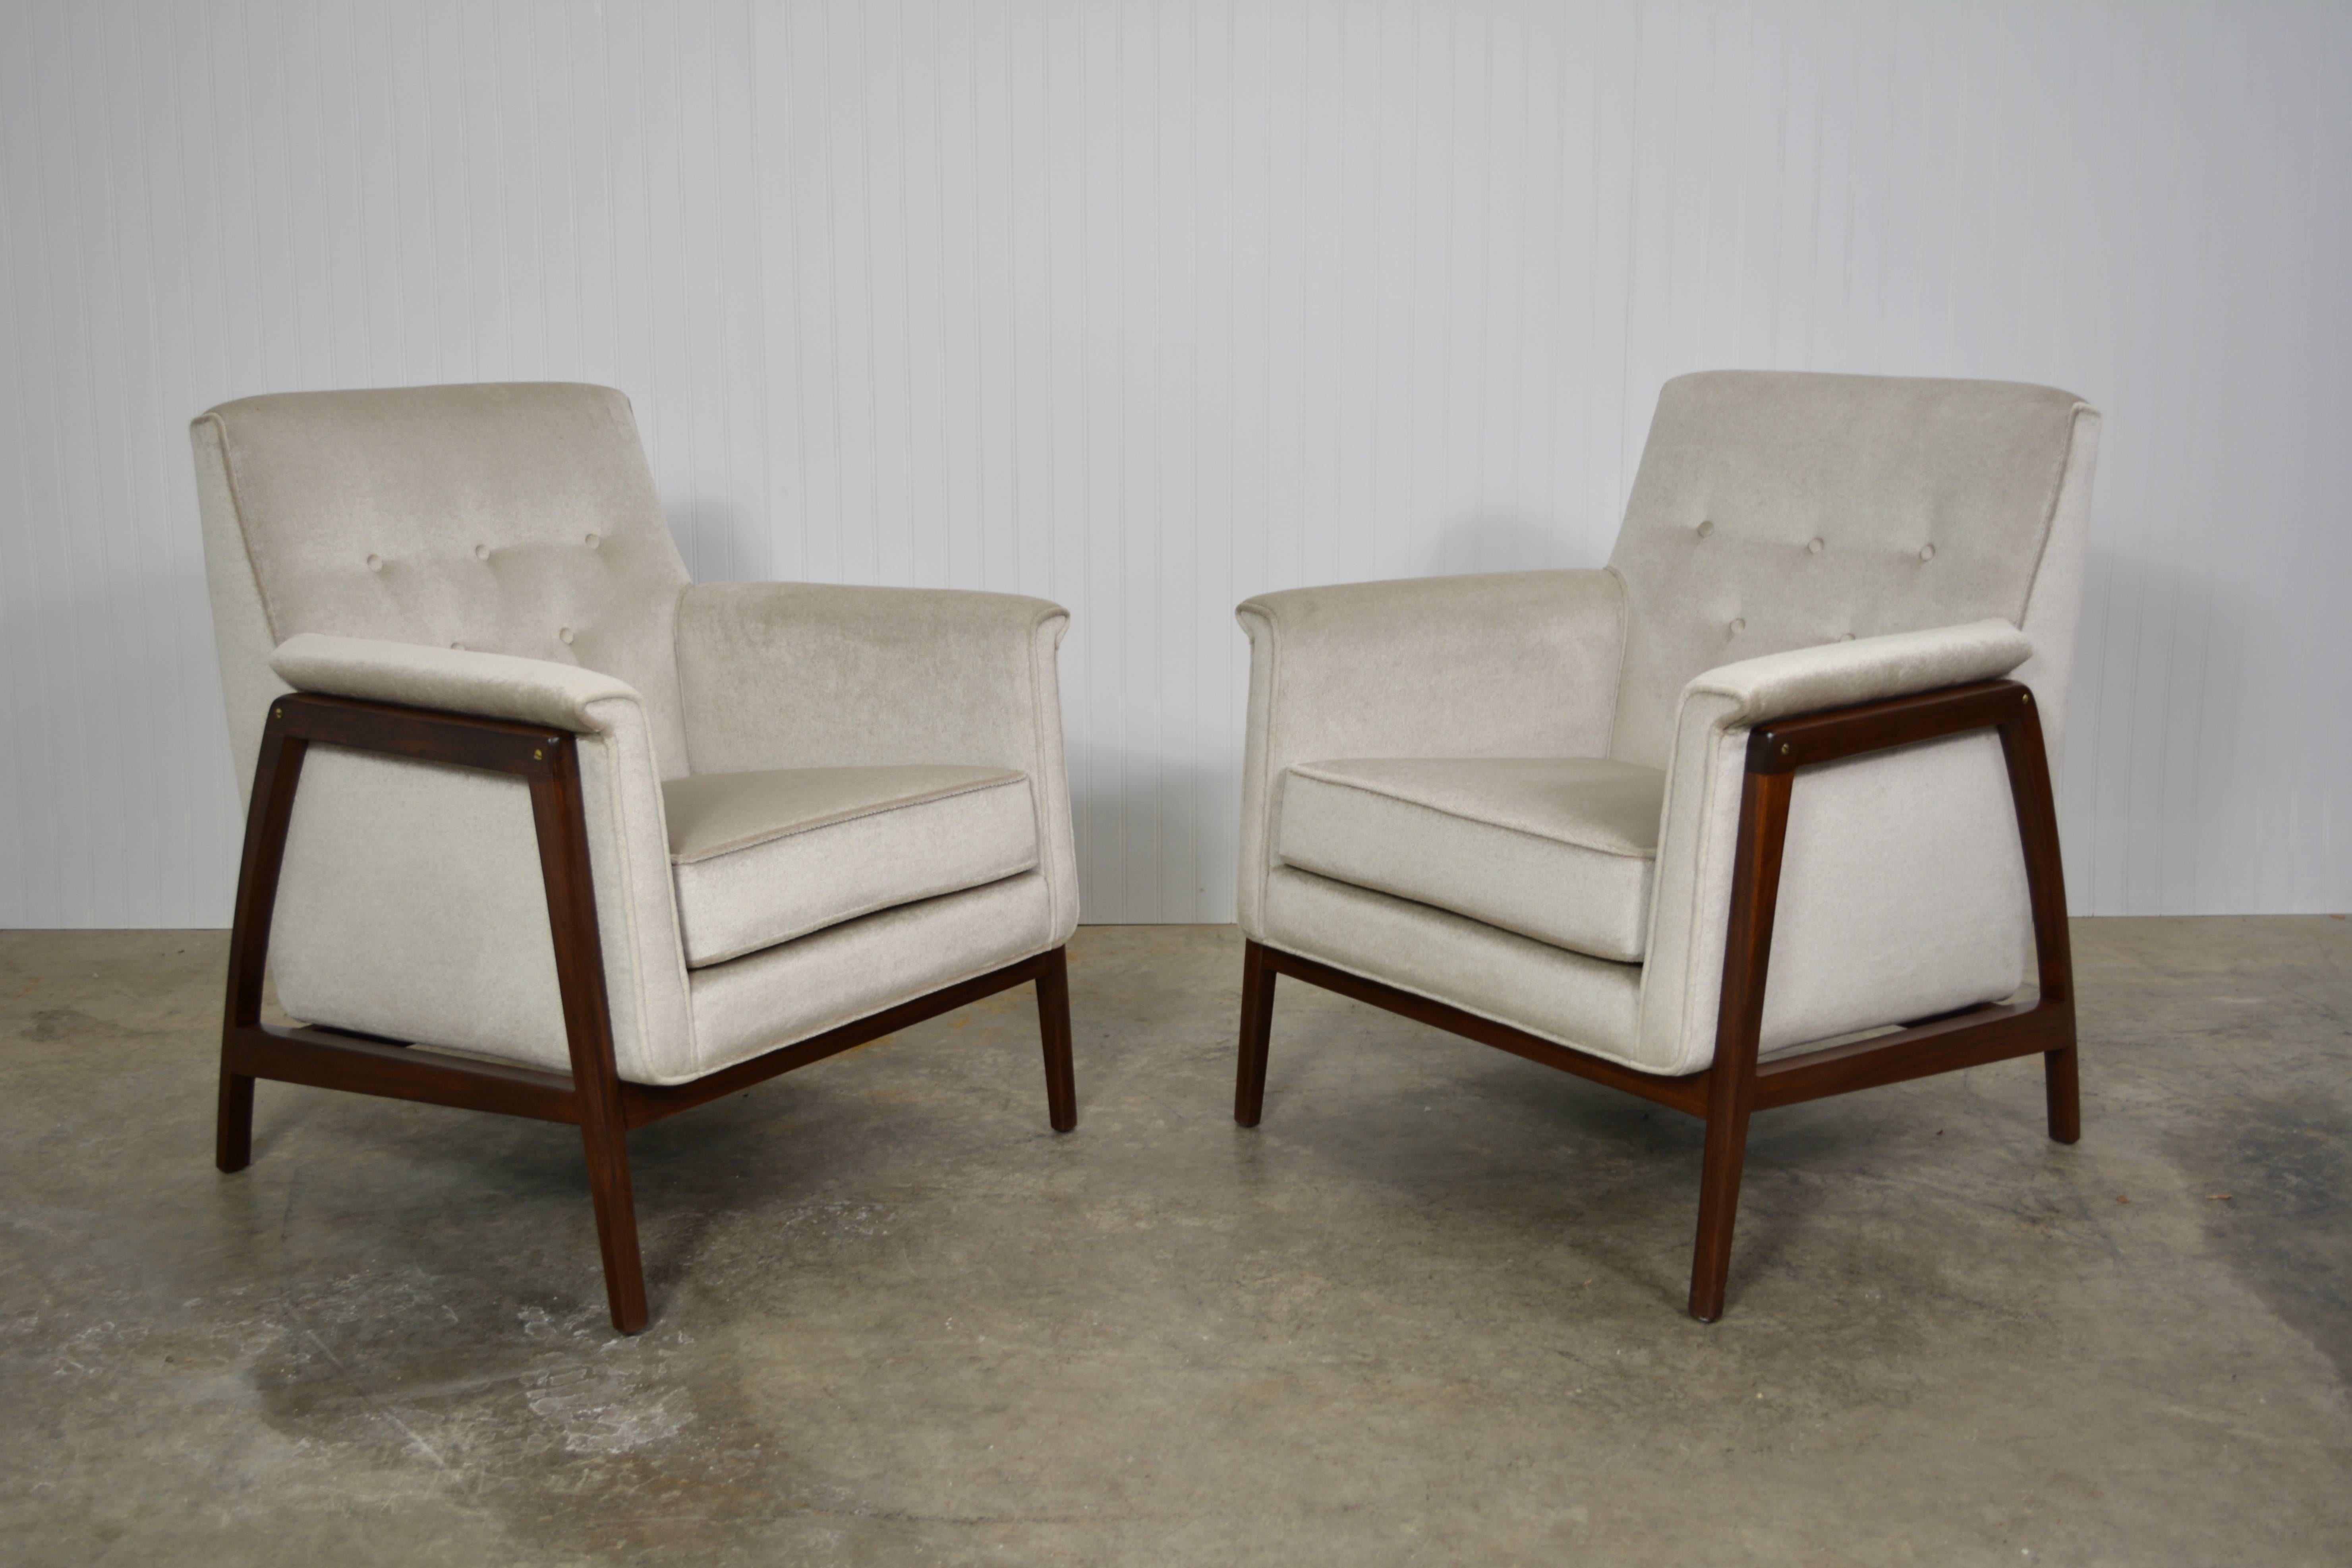 A pair of early lounge chairs by Edward Wormley for Dunbar. Newly refinished and recovered in mohair.